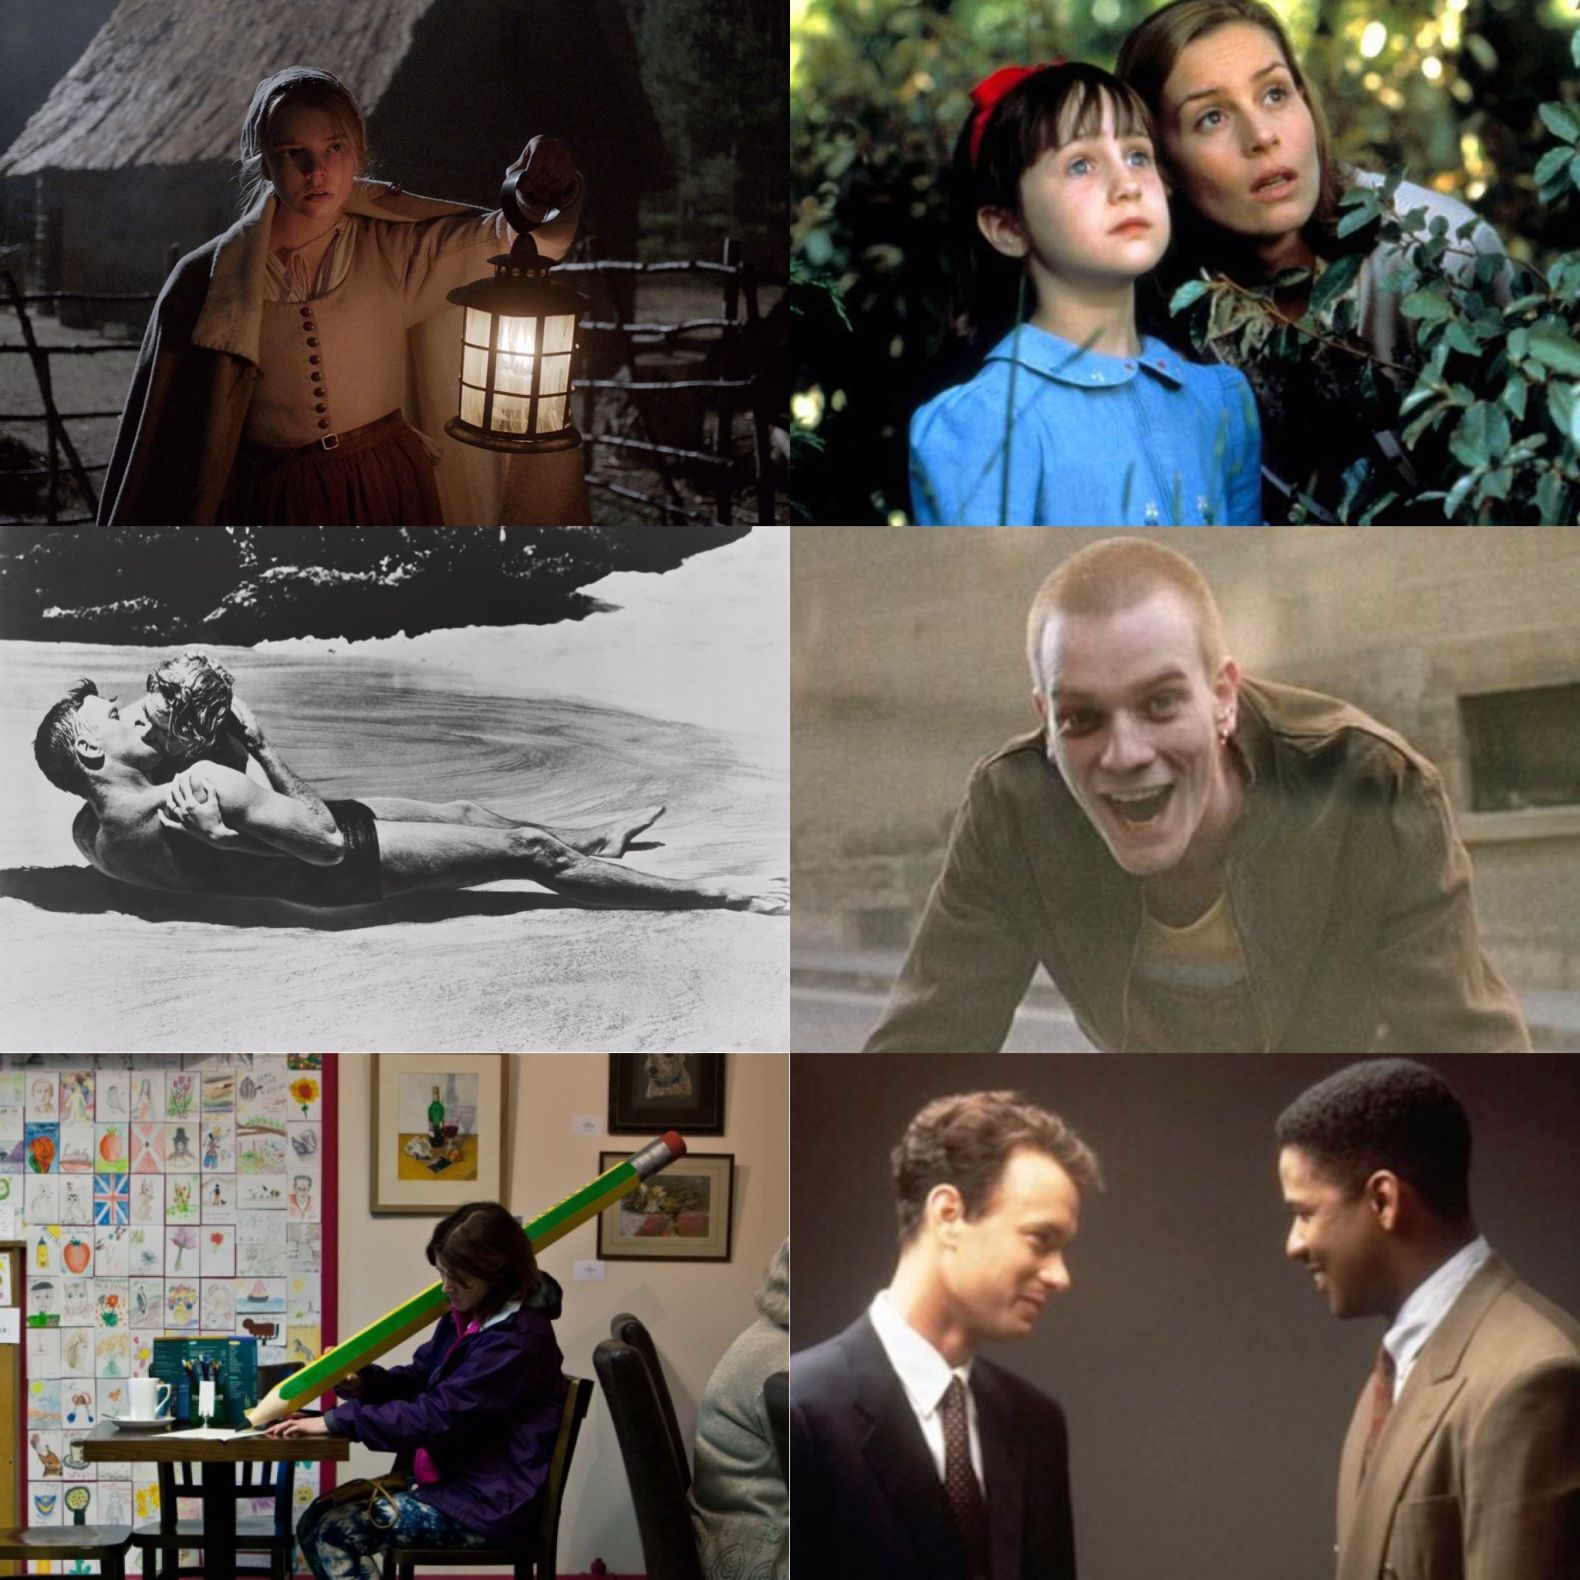 Duke Box #4: Our Guide to the Best Films on TV